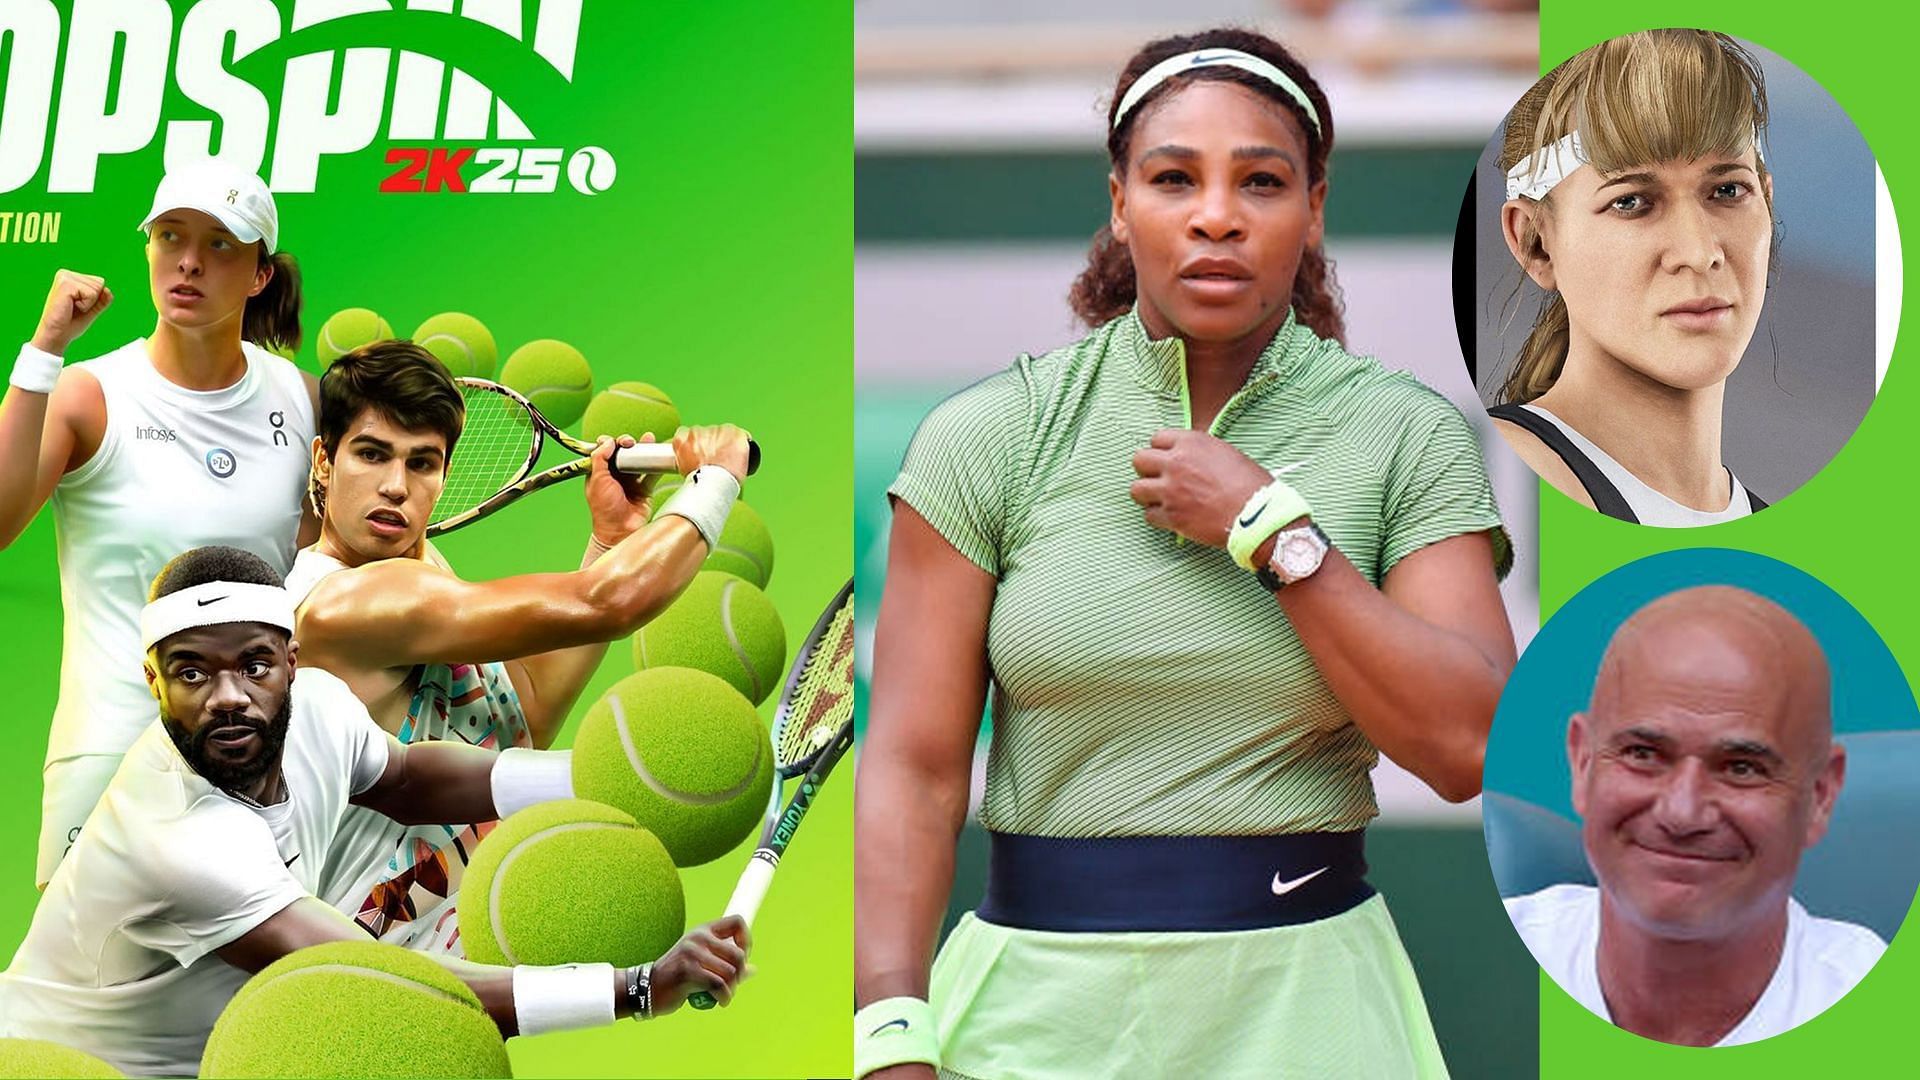 Top Spin 2k25 featuring the likes of Serena Williams, Carlos Alcaraz, Andre Agassi